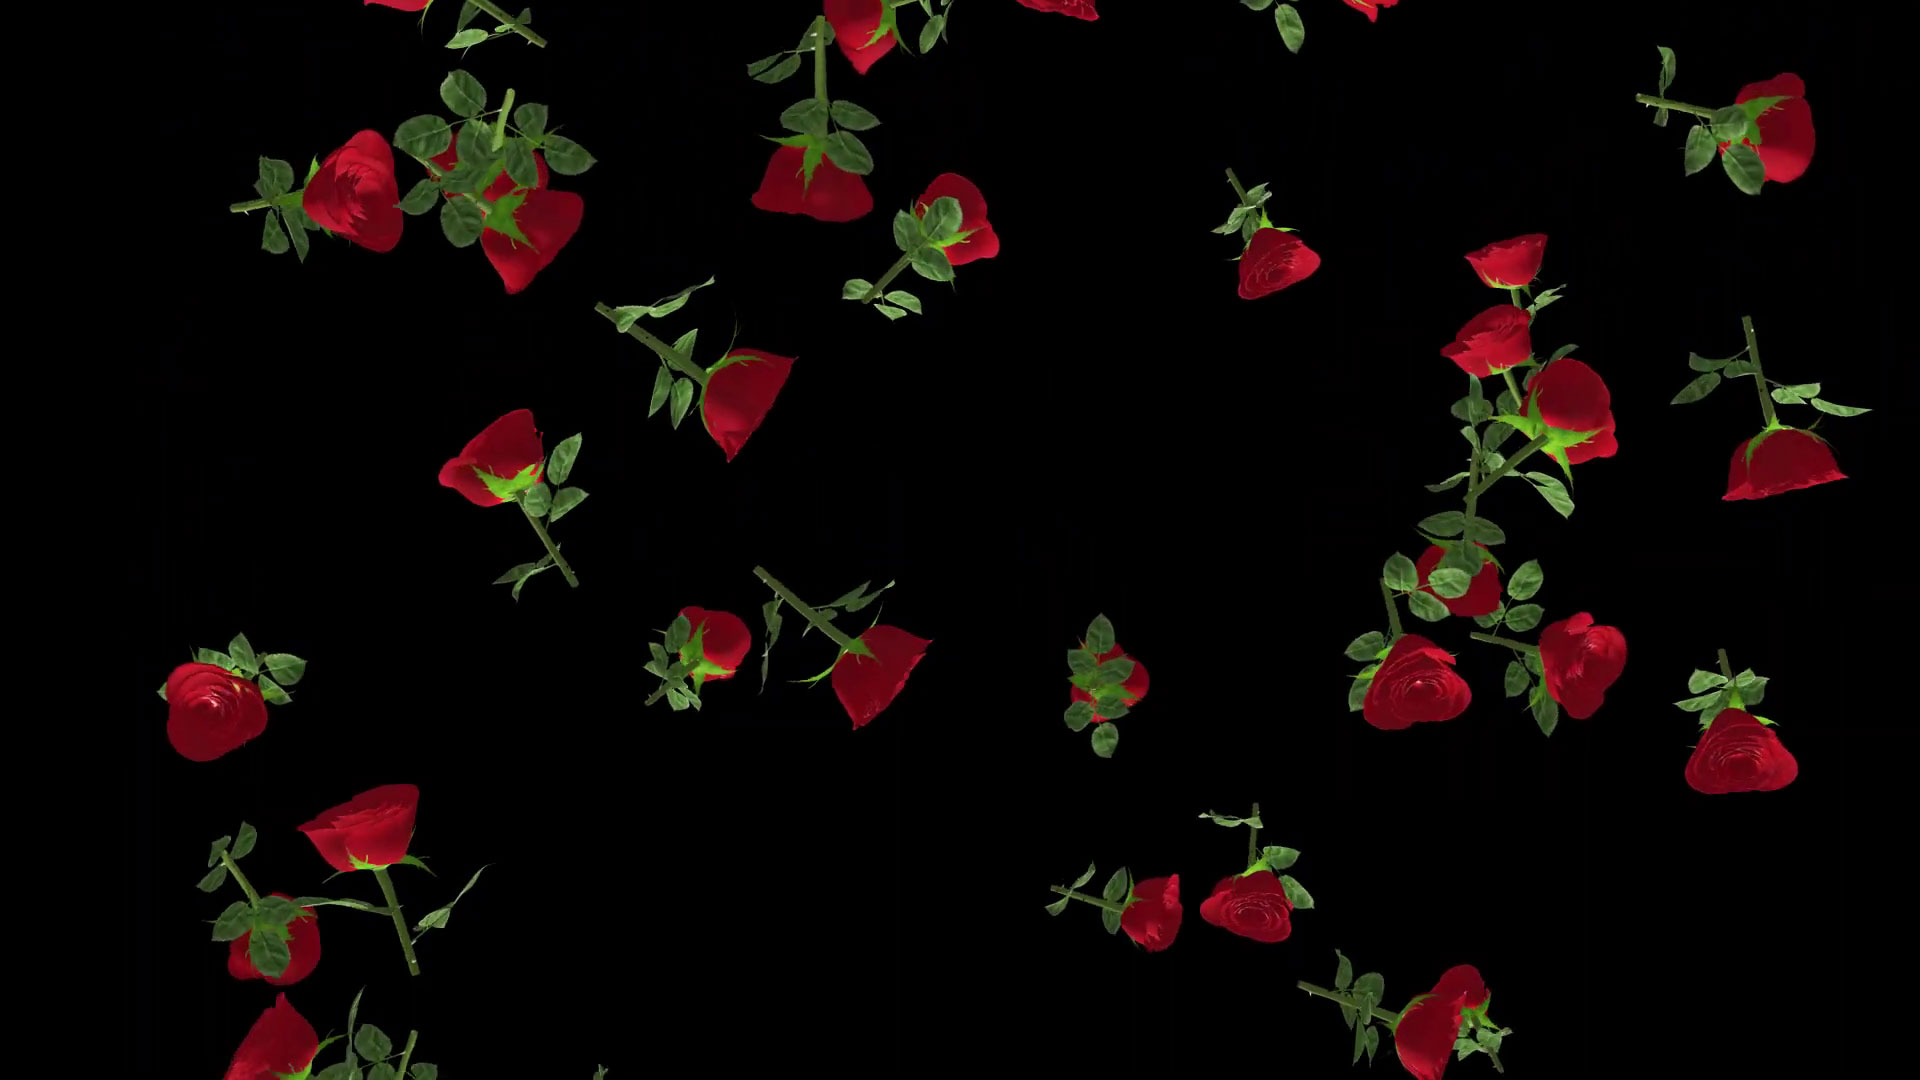 Rose Flowers With Leaves Falling Animation Black Screen and White Screen  Background - All Design Creative